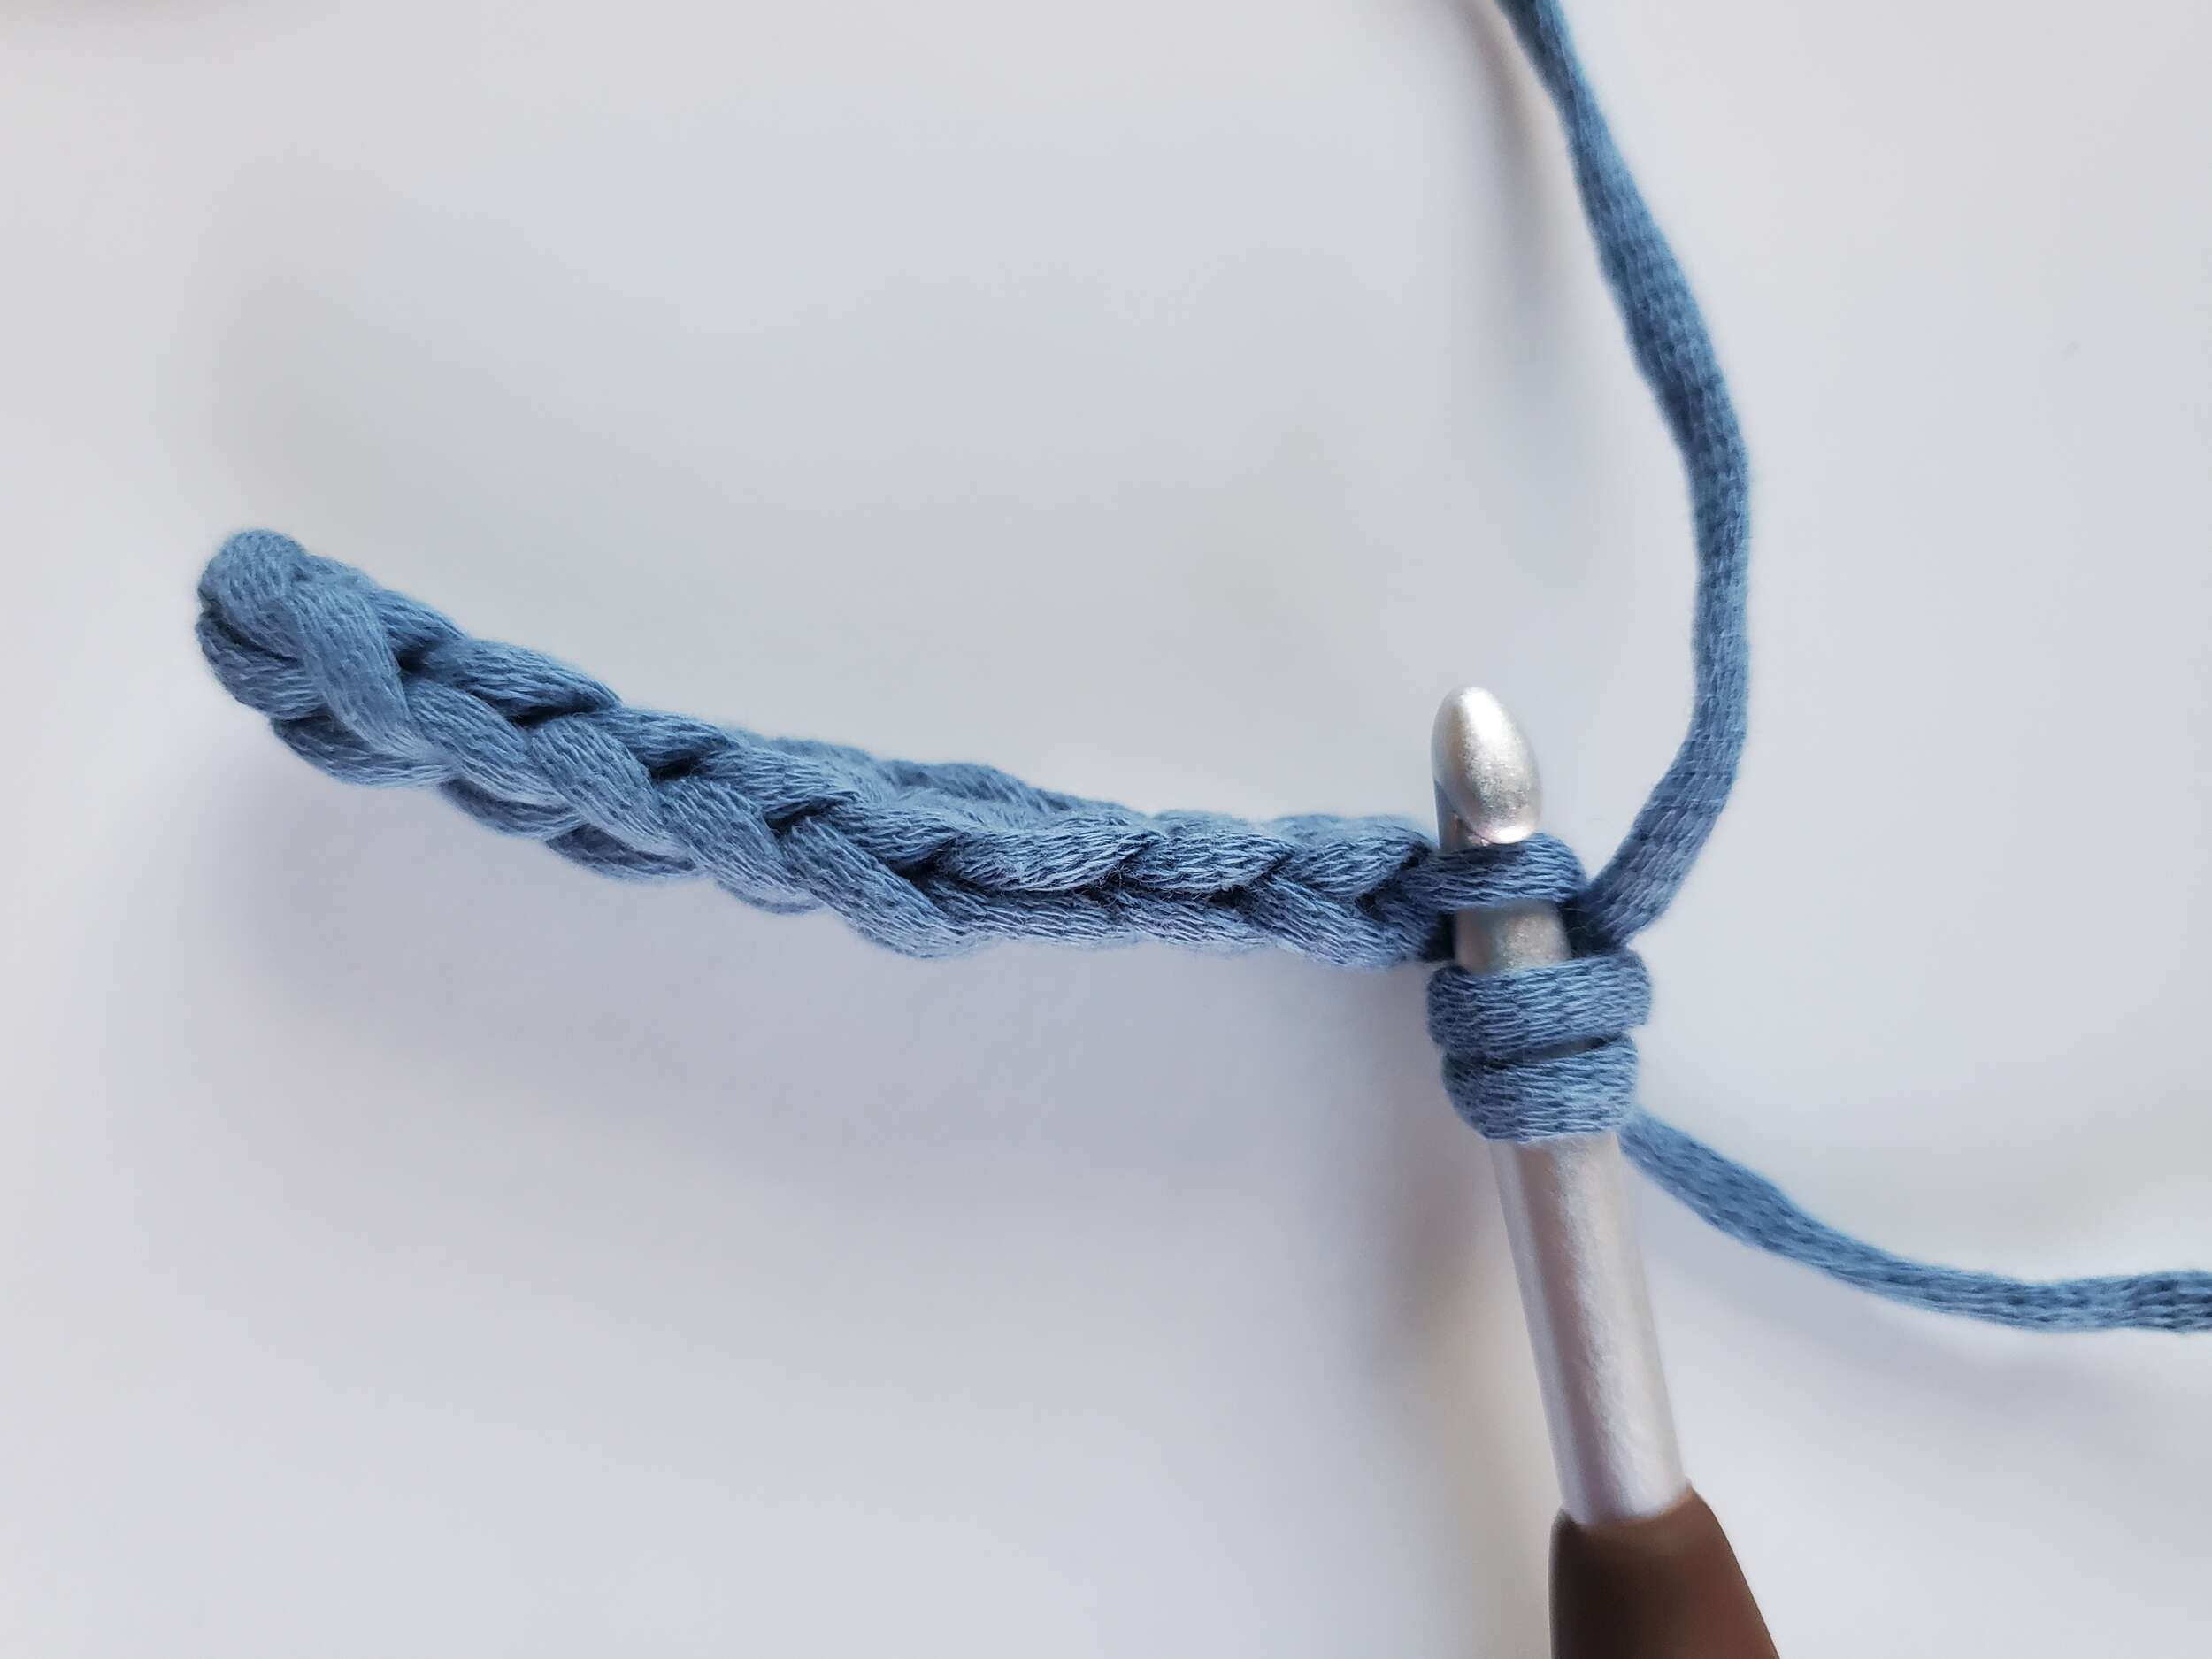 crochet hook inserted under the back loop of a stitch when making a hdc-slst-blo